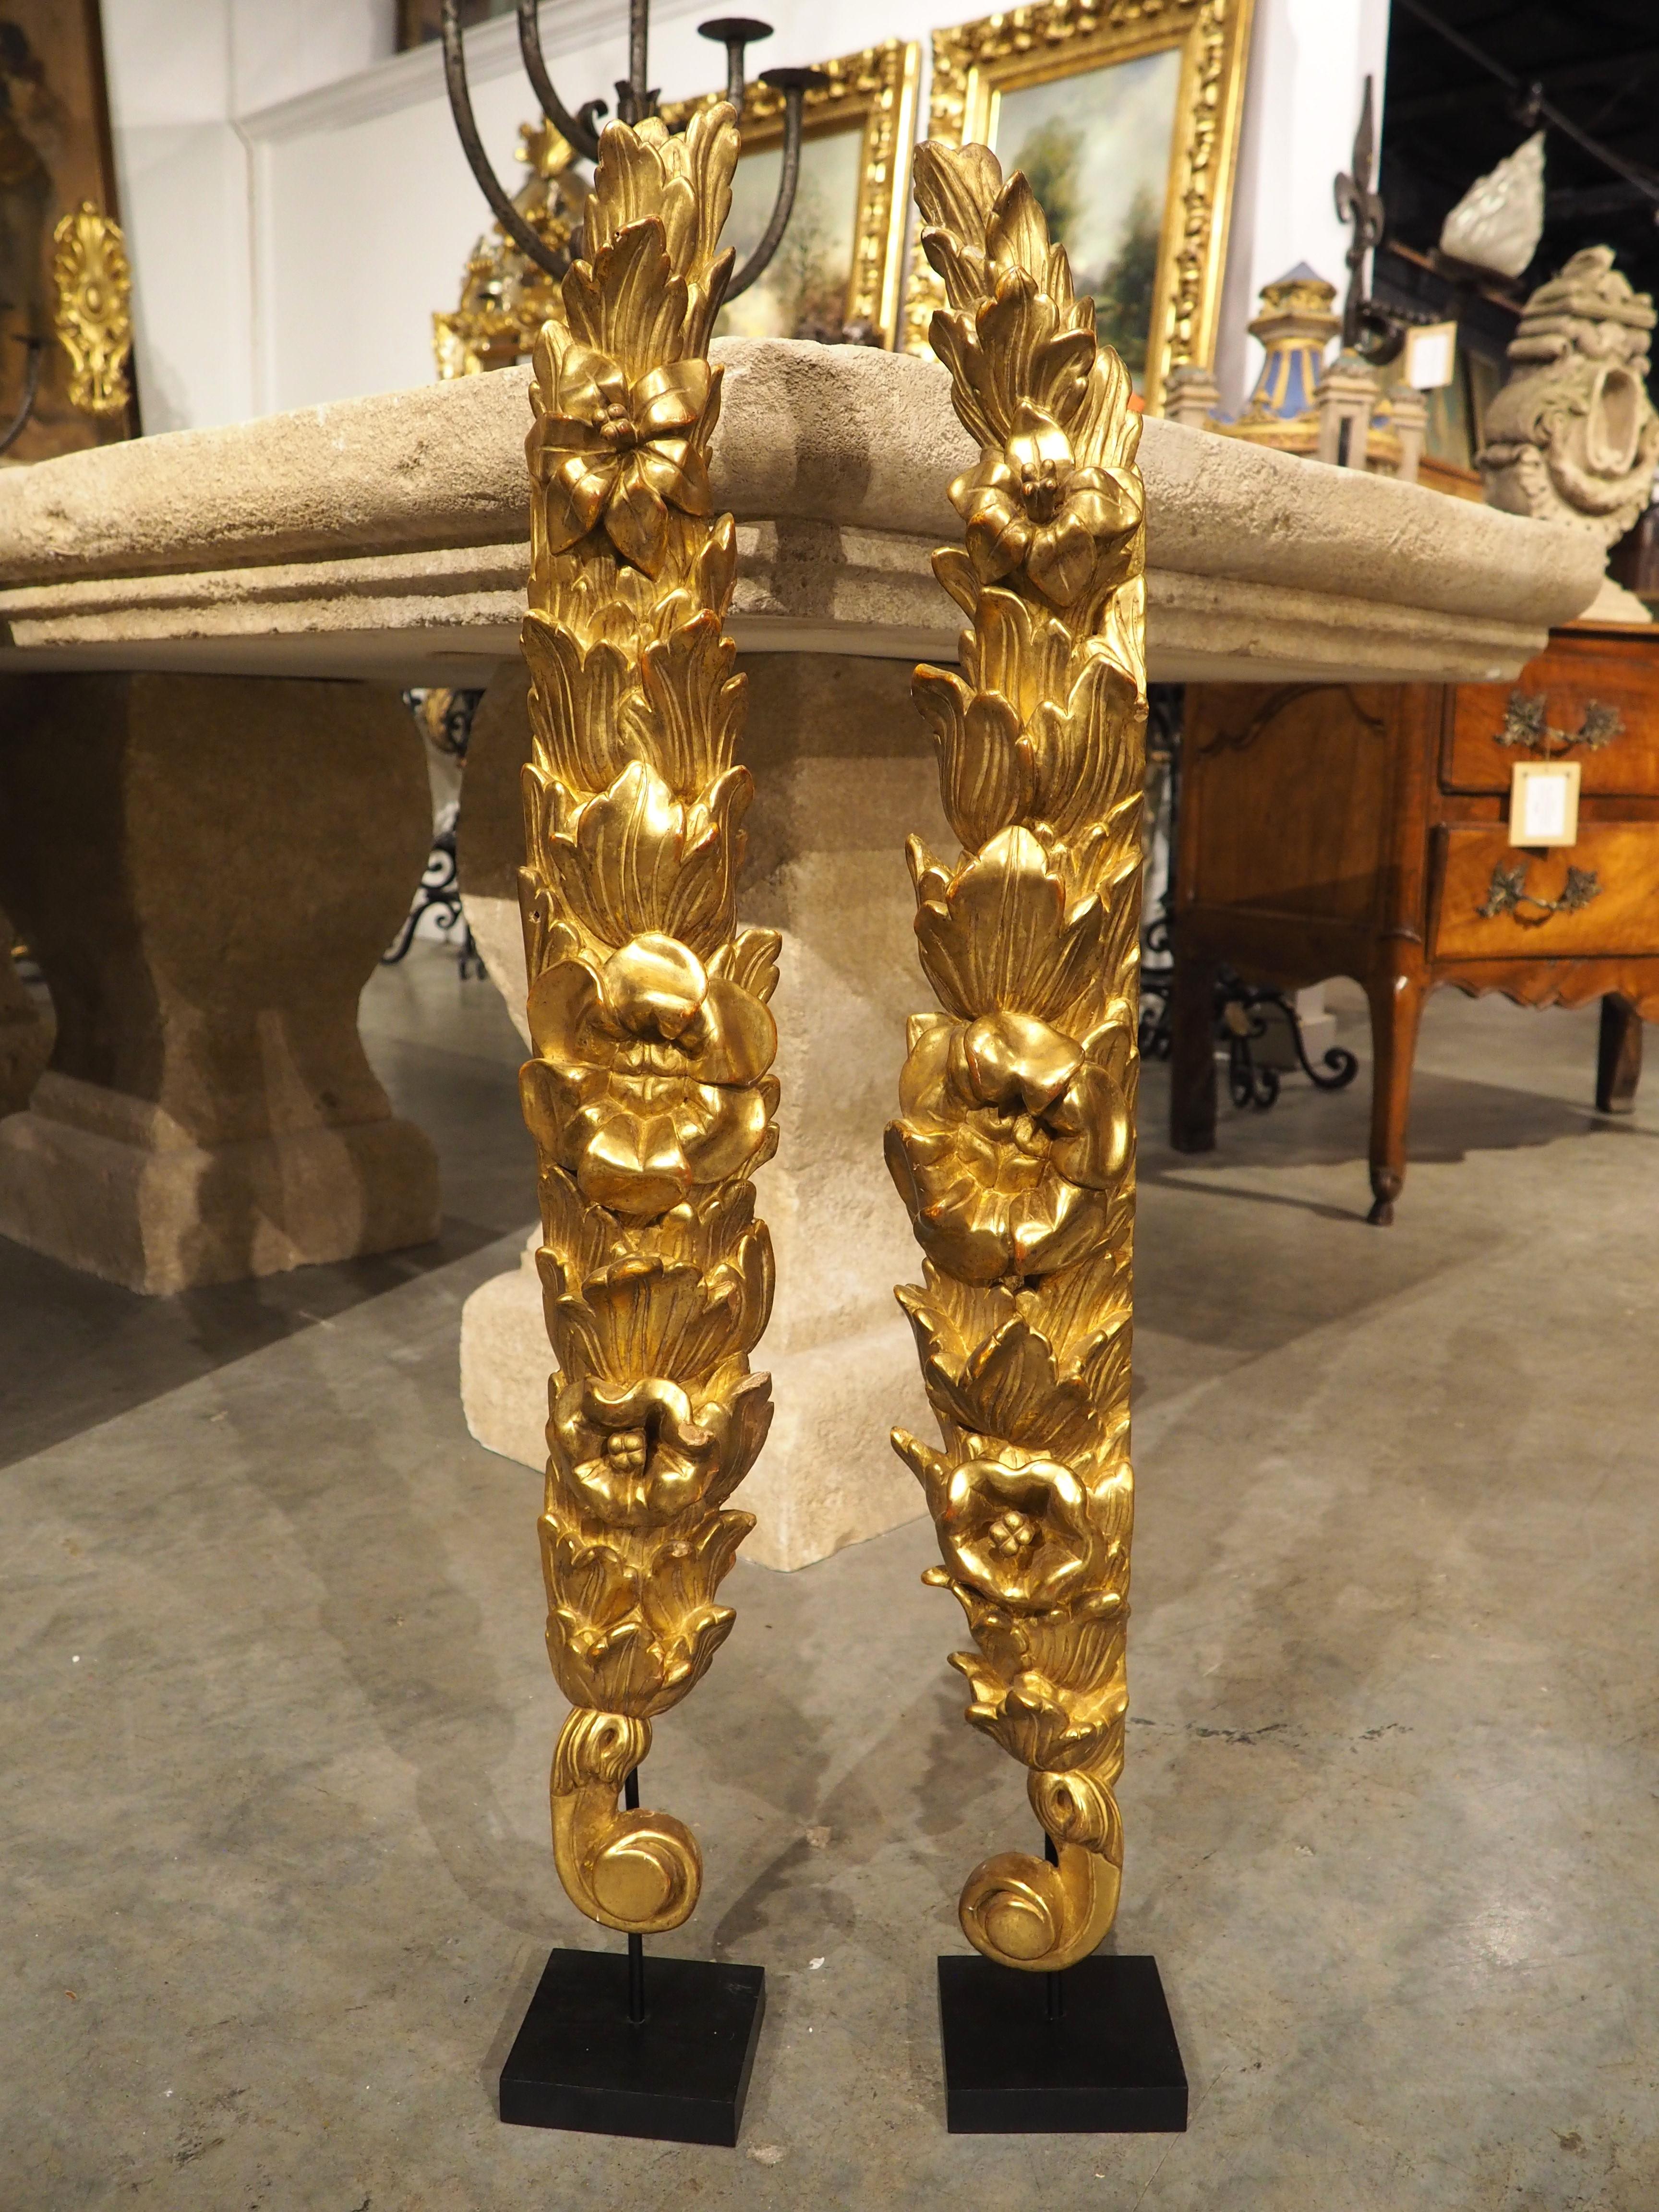 Pair of 18th Century Giltwood Altar Ornaments from Italy (34 inches tall) 4